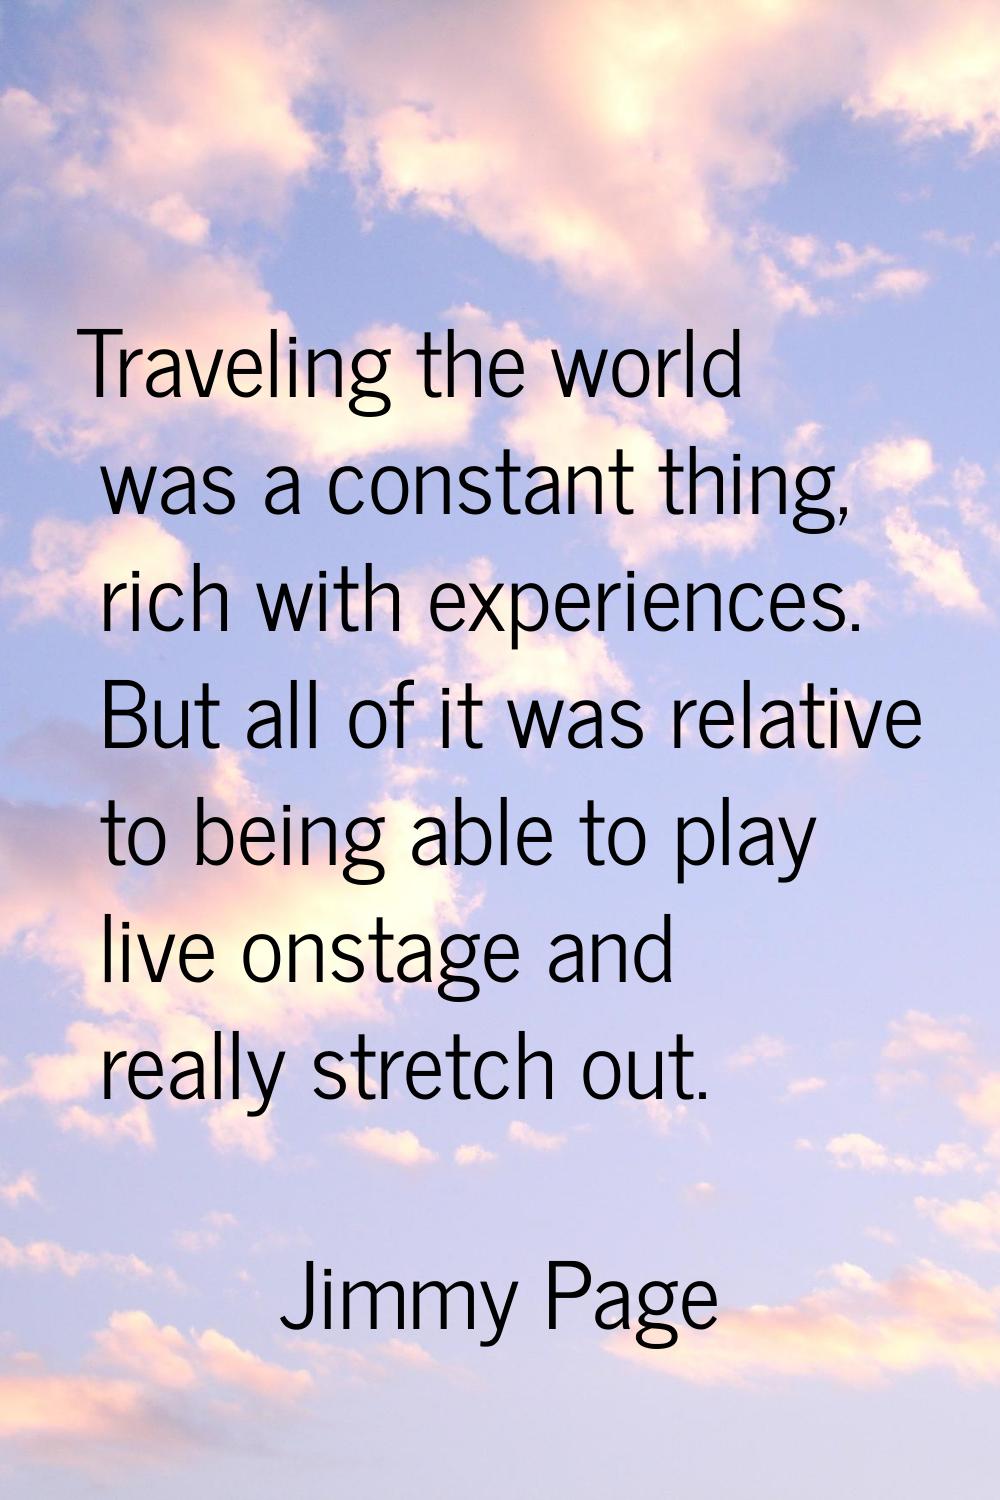 Traveling the world was a constant thing, rich with experiences. But all of it was relative to bein